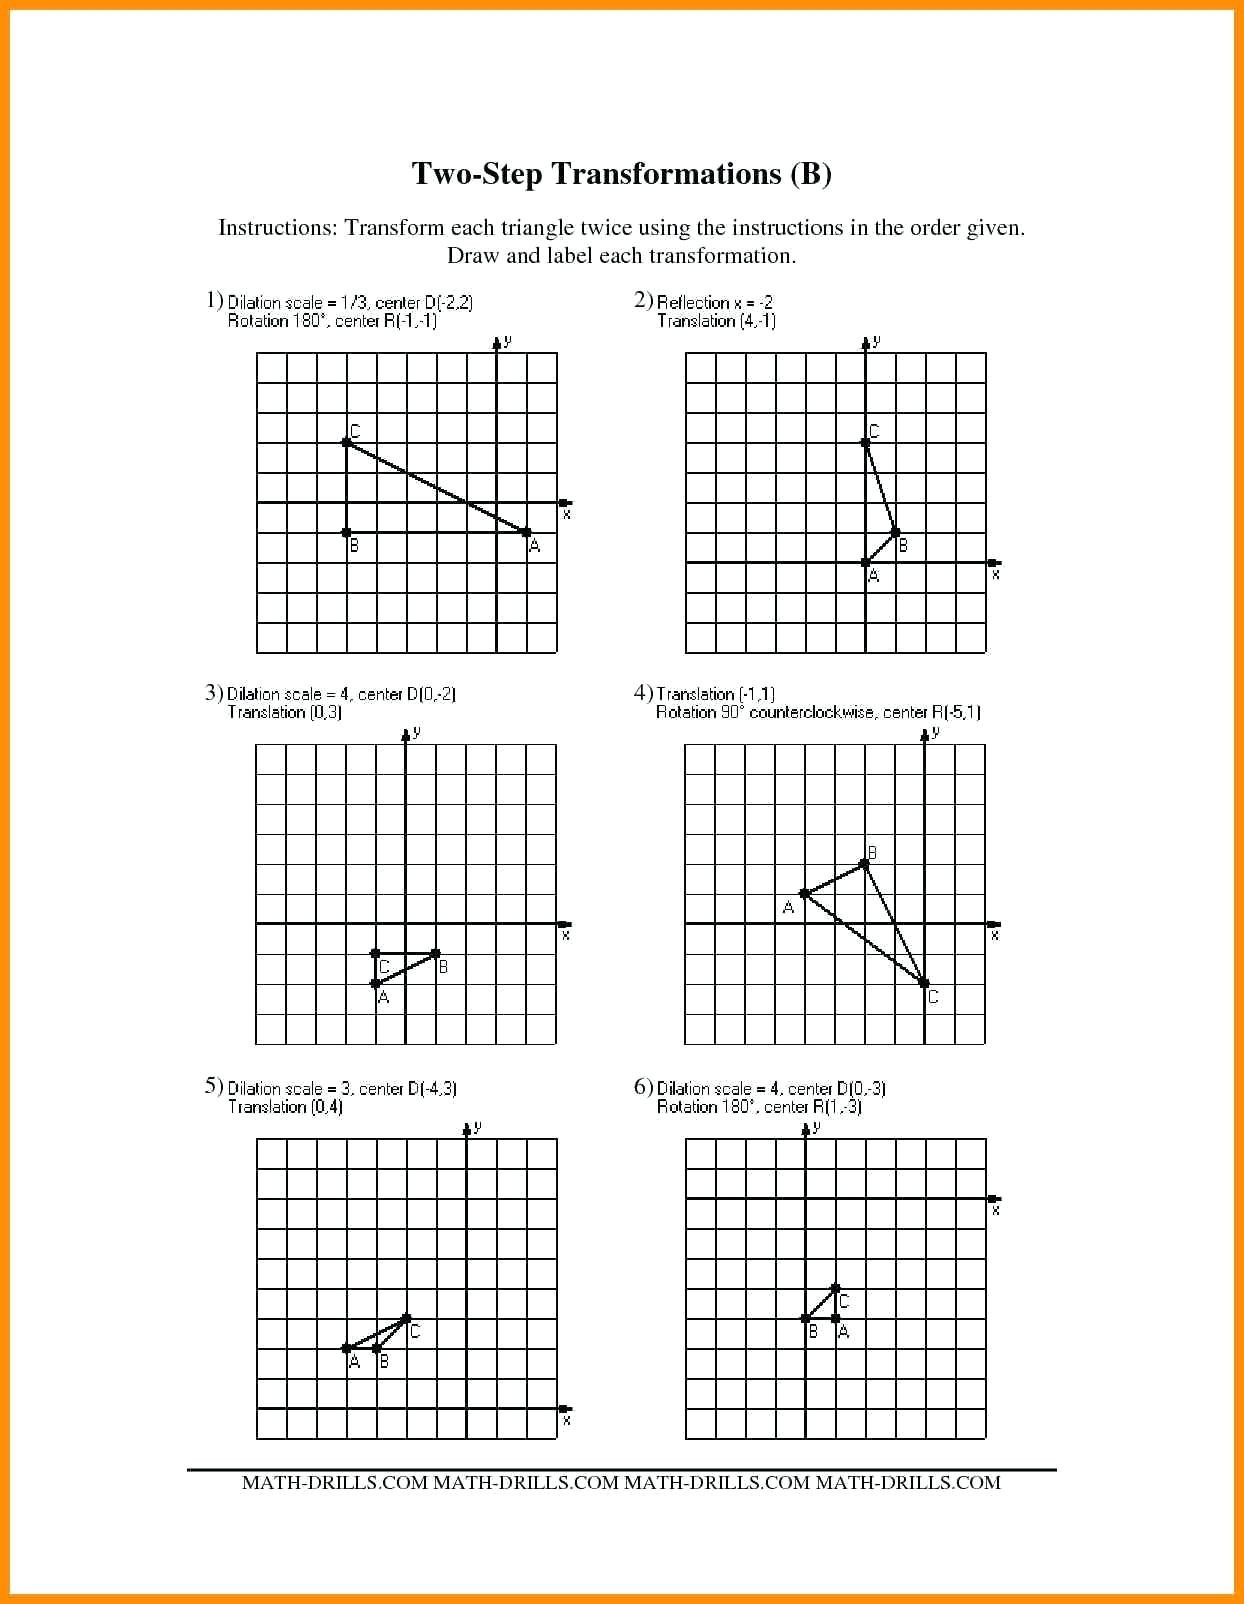 Free Math Worksheets Third Grade 3 Subtraction Subtract whole Hundreds From 4 Digit Numbers